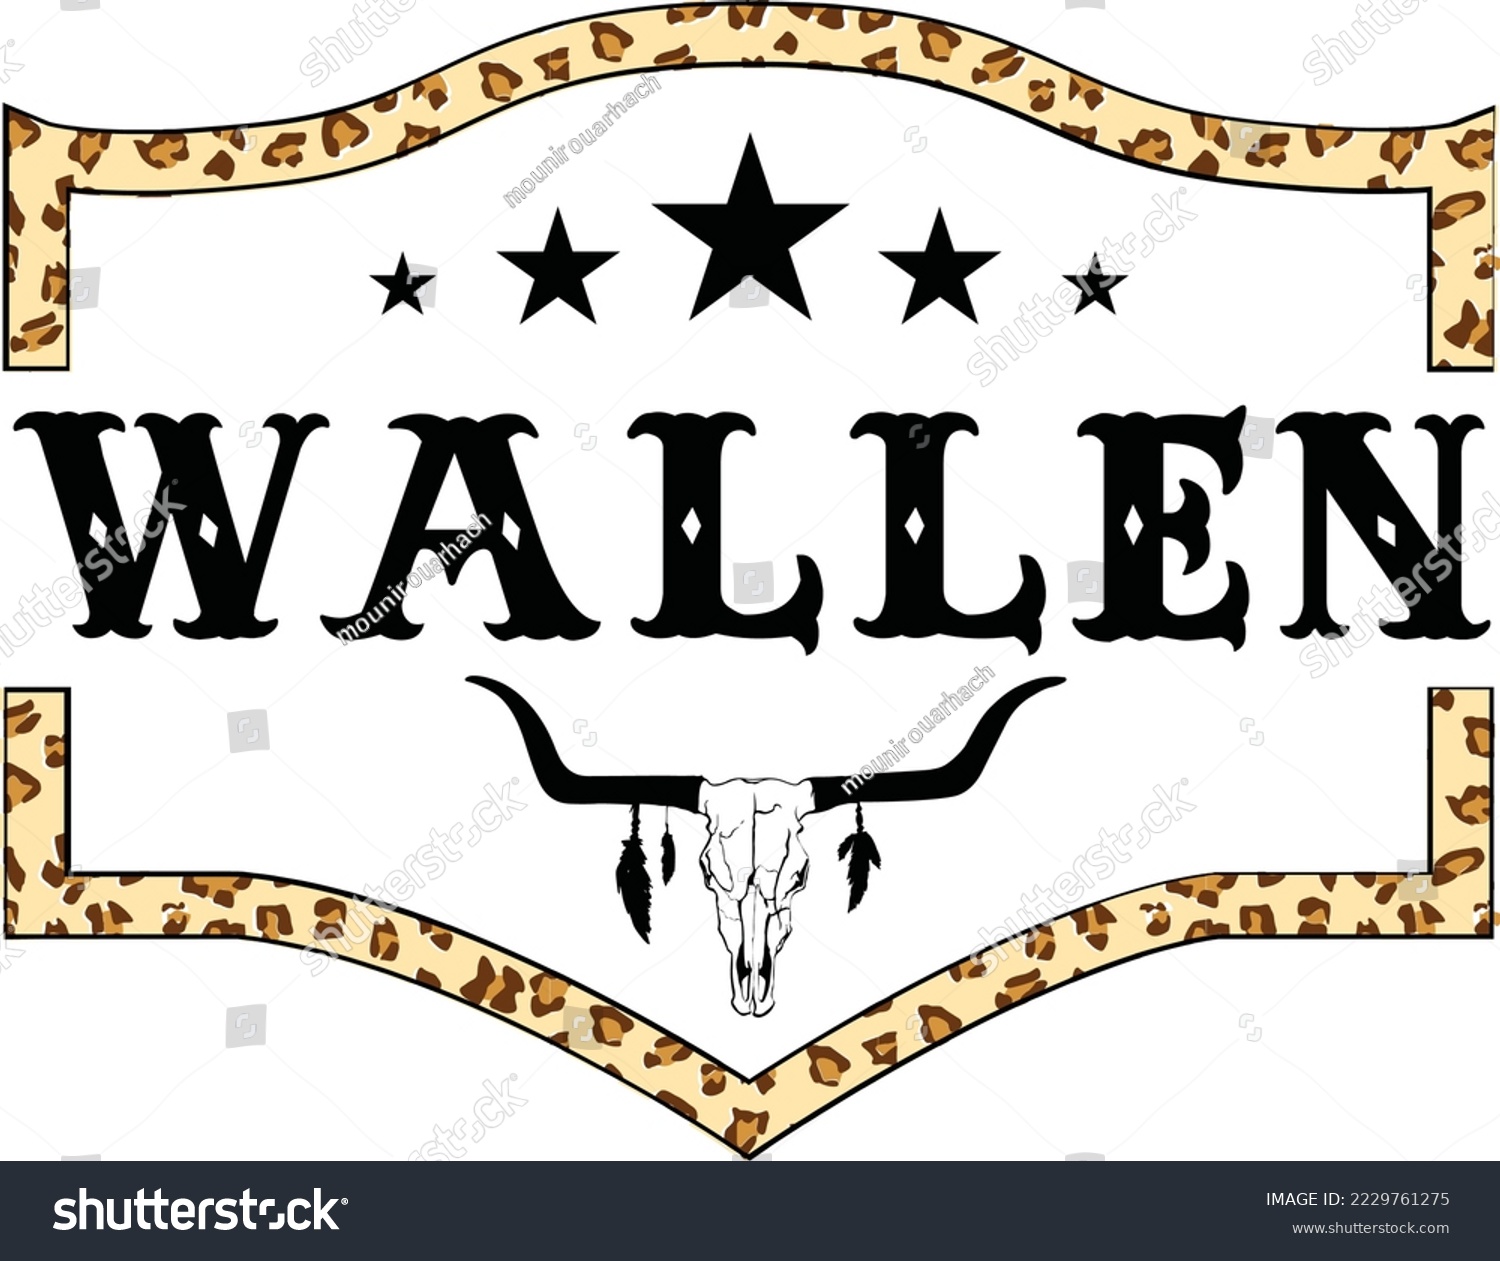 SVG of wallen bull skull yellow and black design in a white background svg